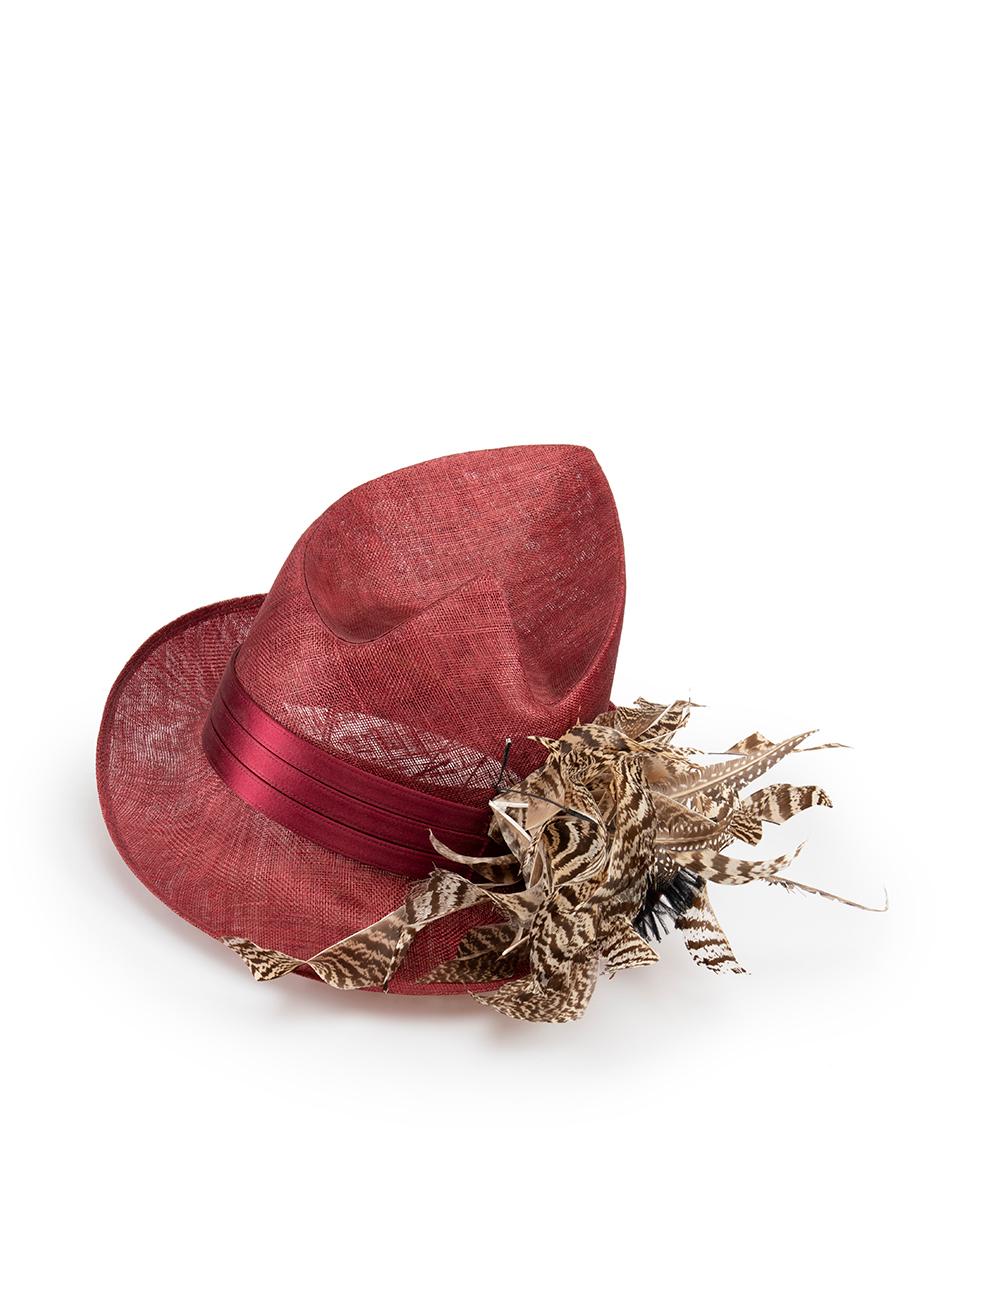 CONDITION is Good. Minor wear to hat is evident. Light wear to feather trim where some trim is deformed and coming loose on this used Philip Treacy designer resale item. 

Details
Burgundy
Cloth textile 
Ascot hat
Feather accent
Elasticated